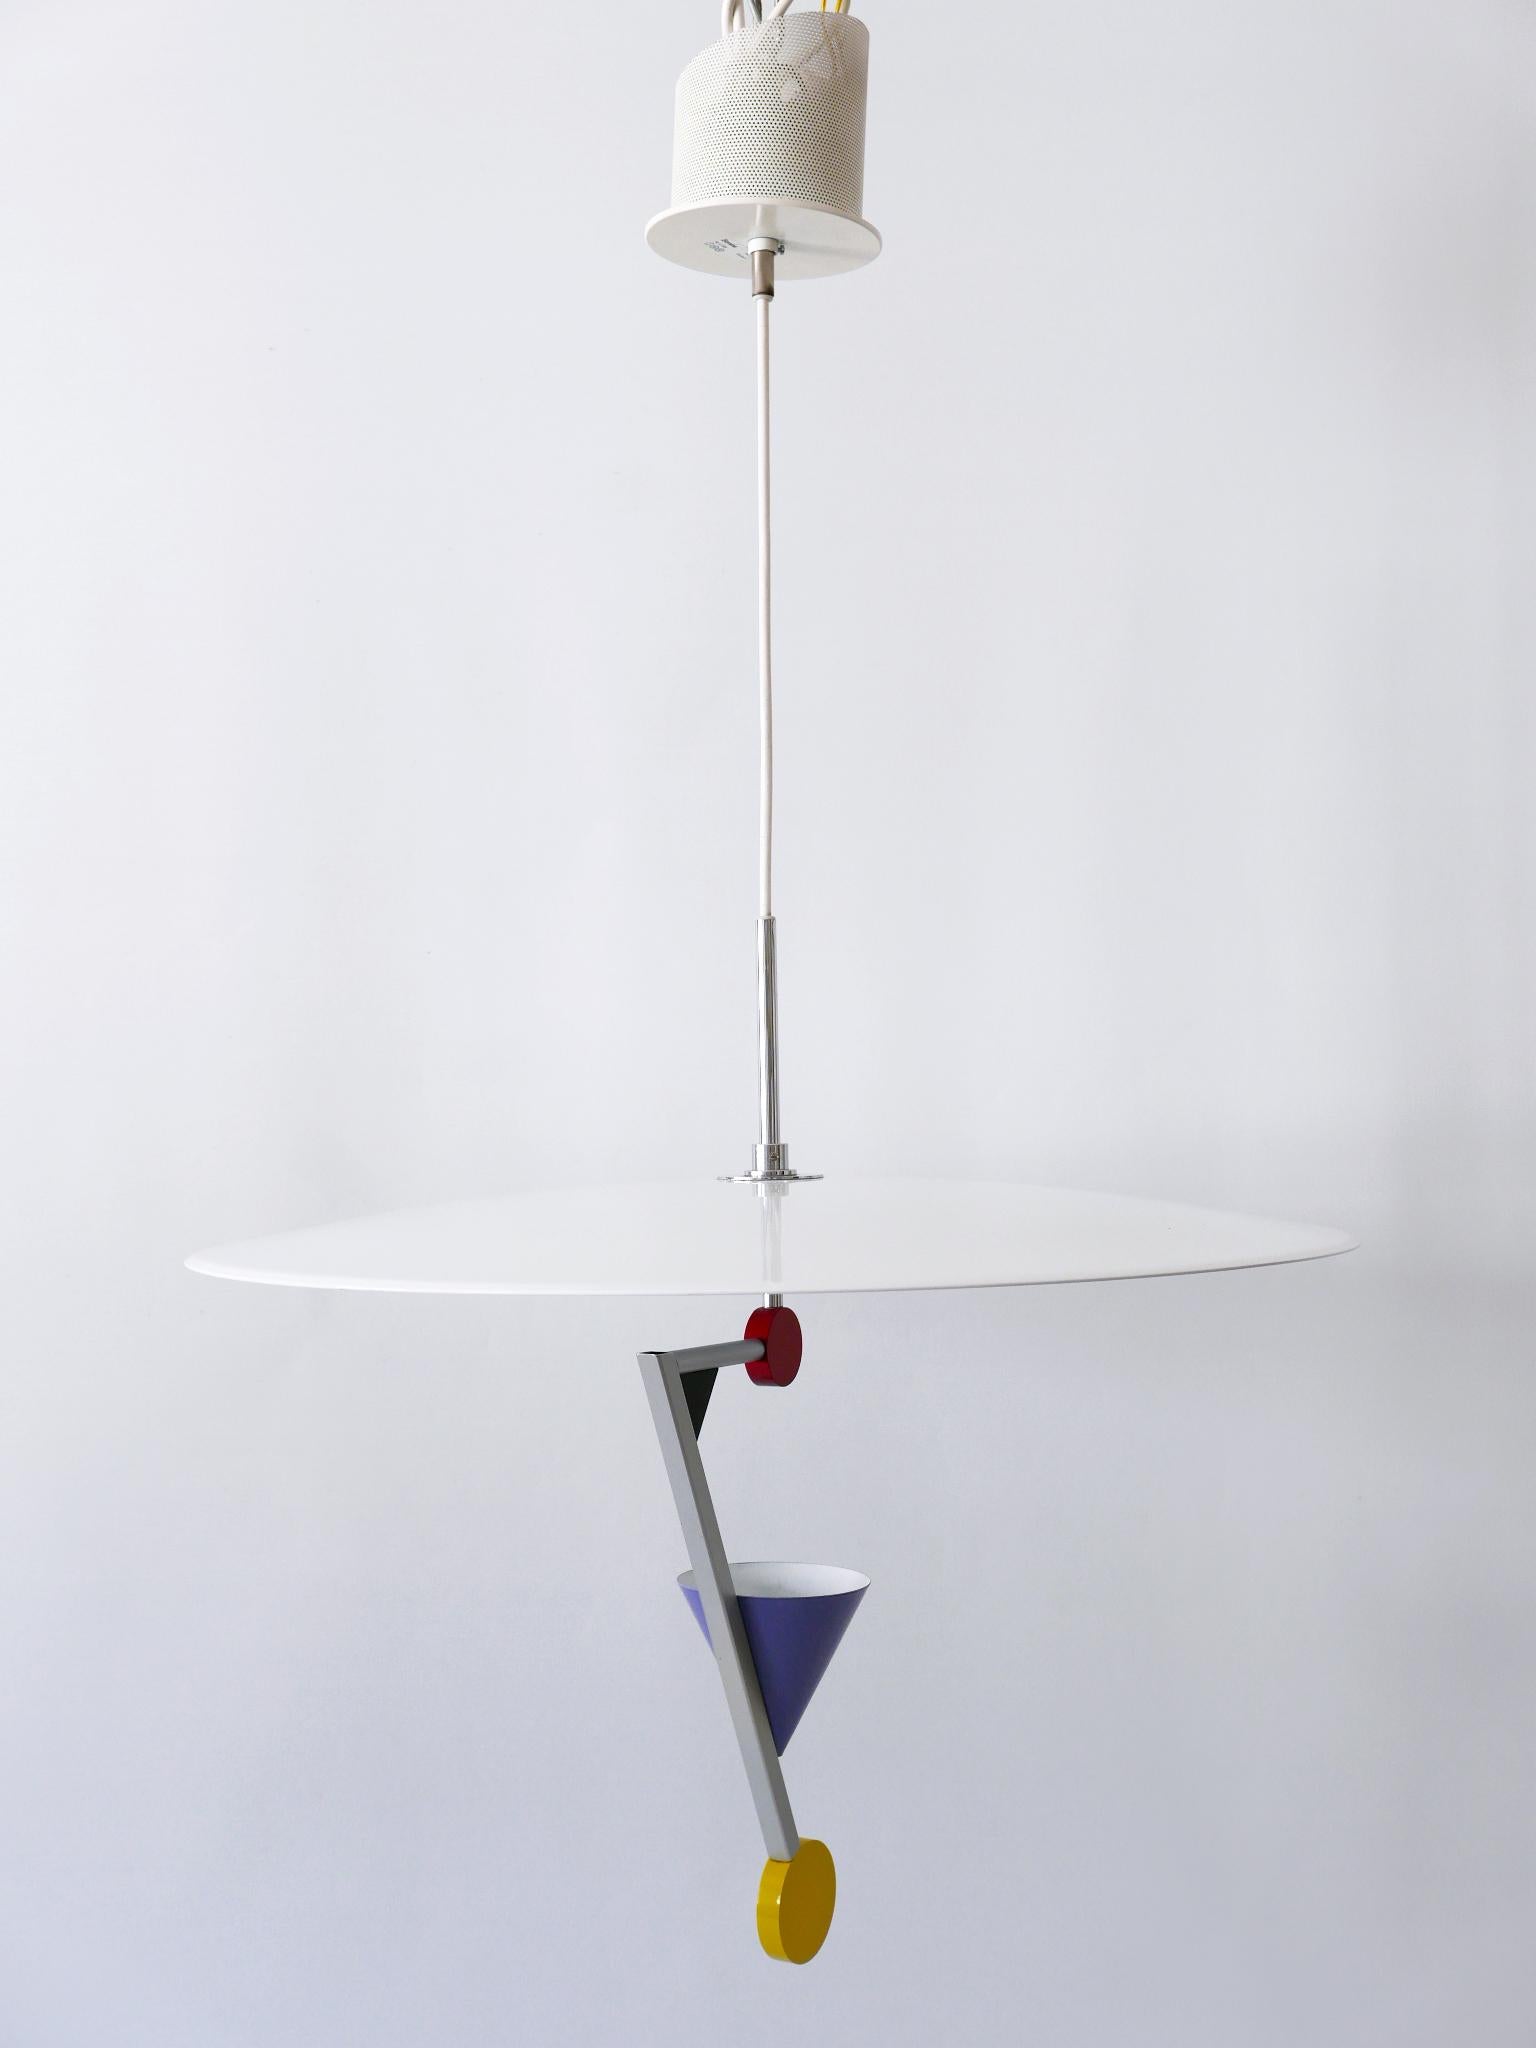 Incroyables lampes suspendues postmodernes Halo There d'Olle Andersson pour Borens 1982 en vente 9